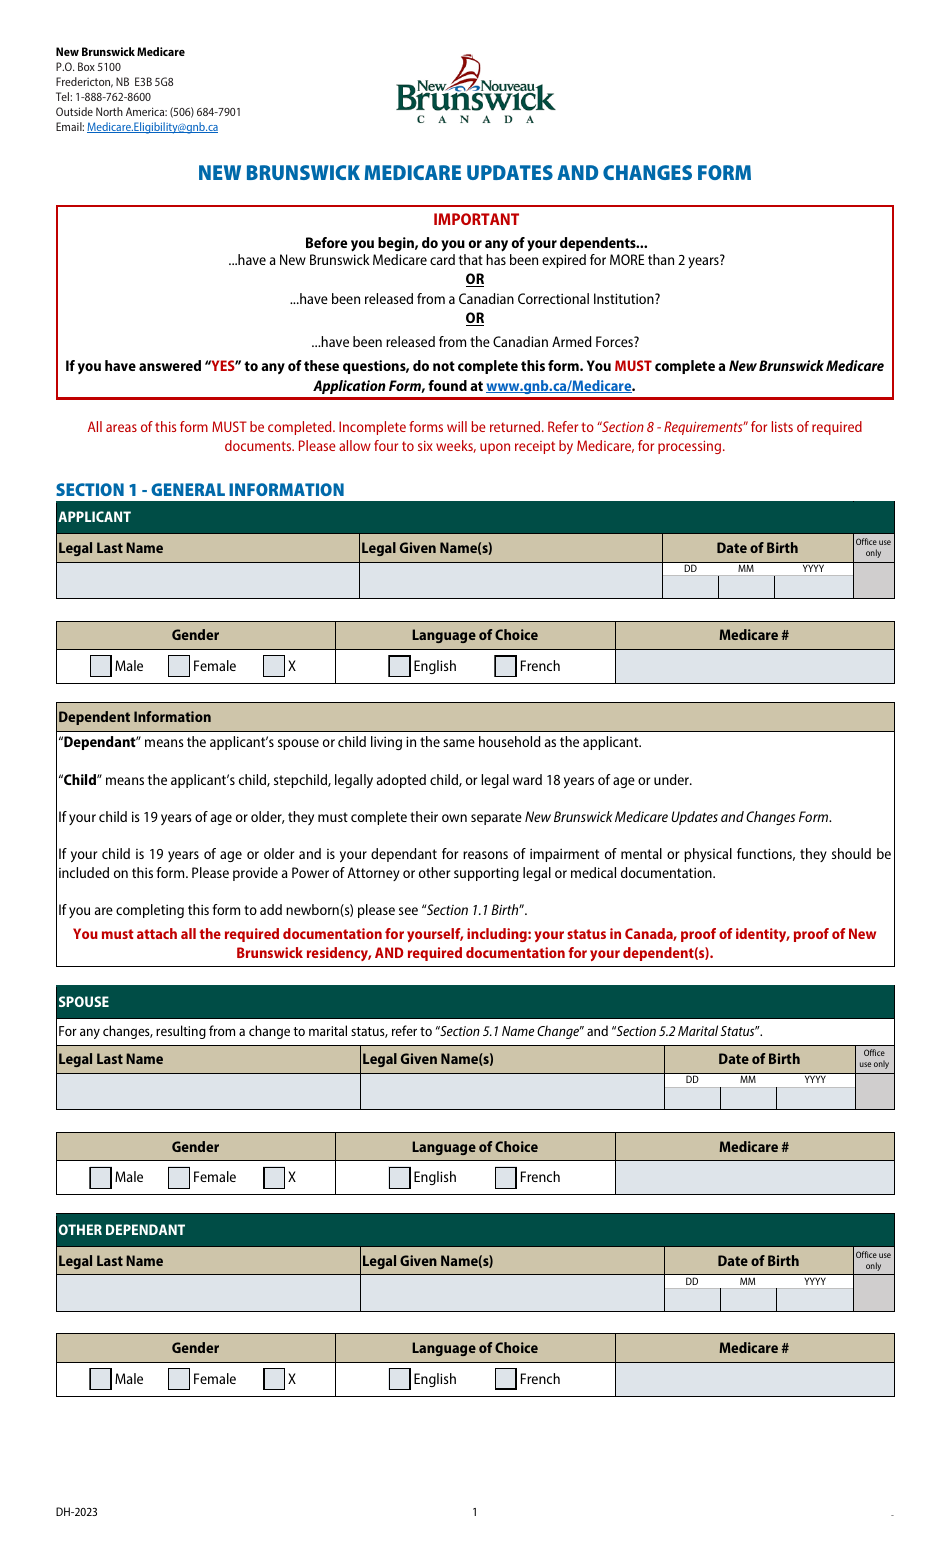 New Brunswick Medicare Updates and Changes Form - New Brunswick, Canada, Page 1